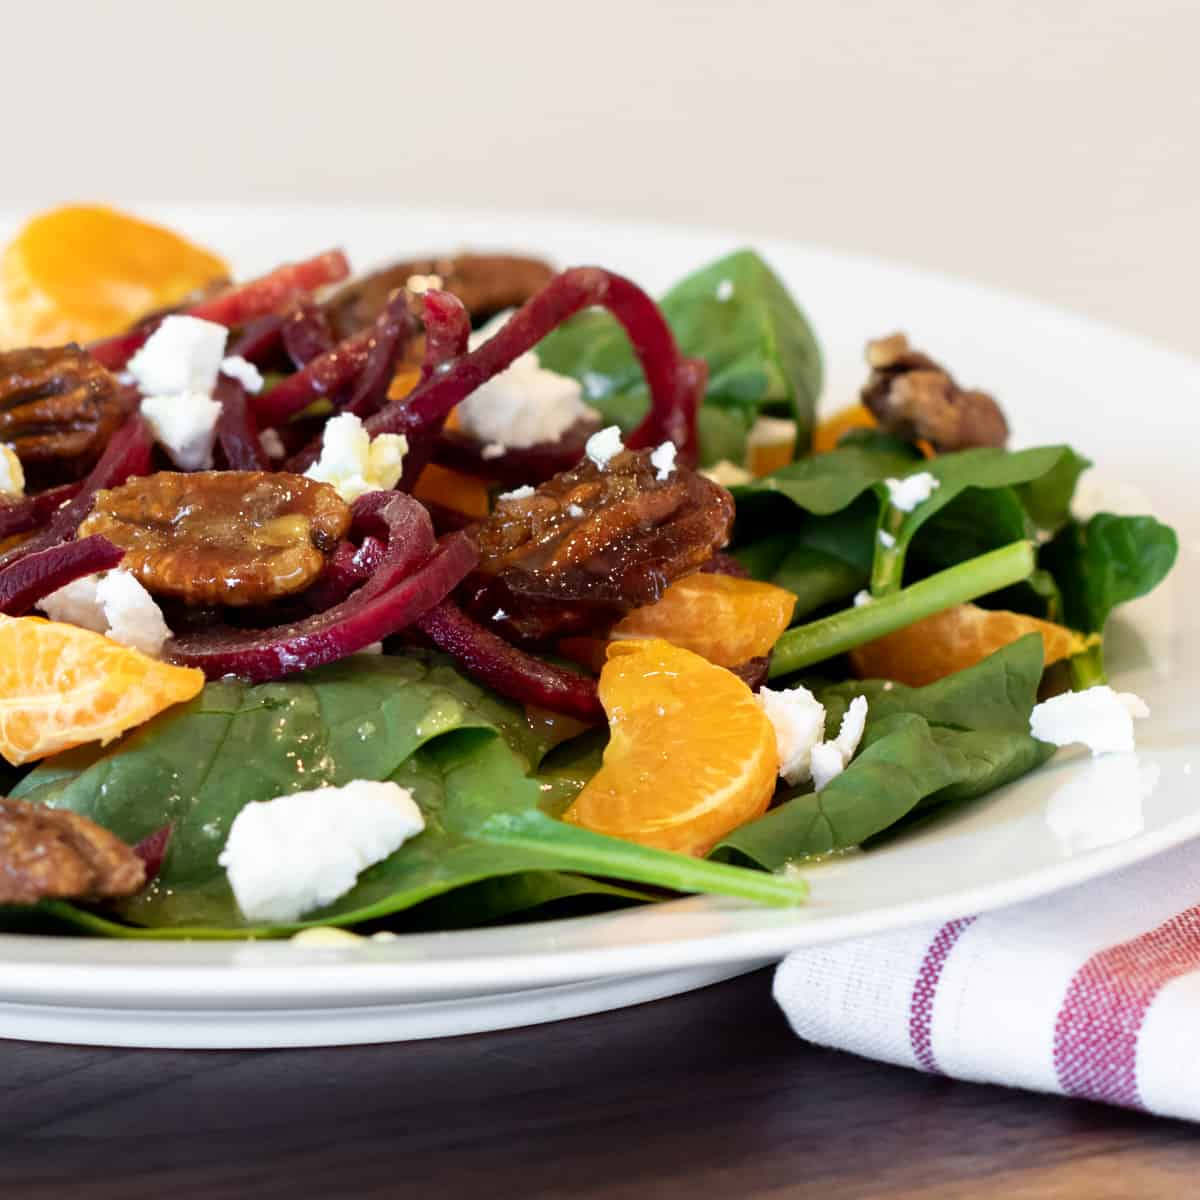 Close up picture with salad that has oranges and pecans.